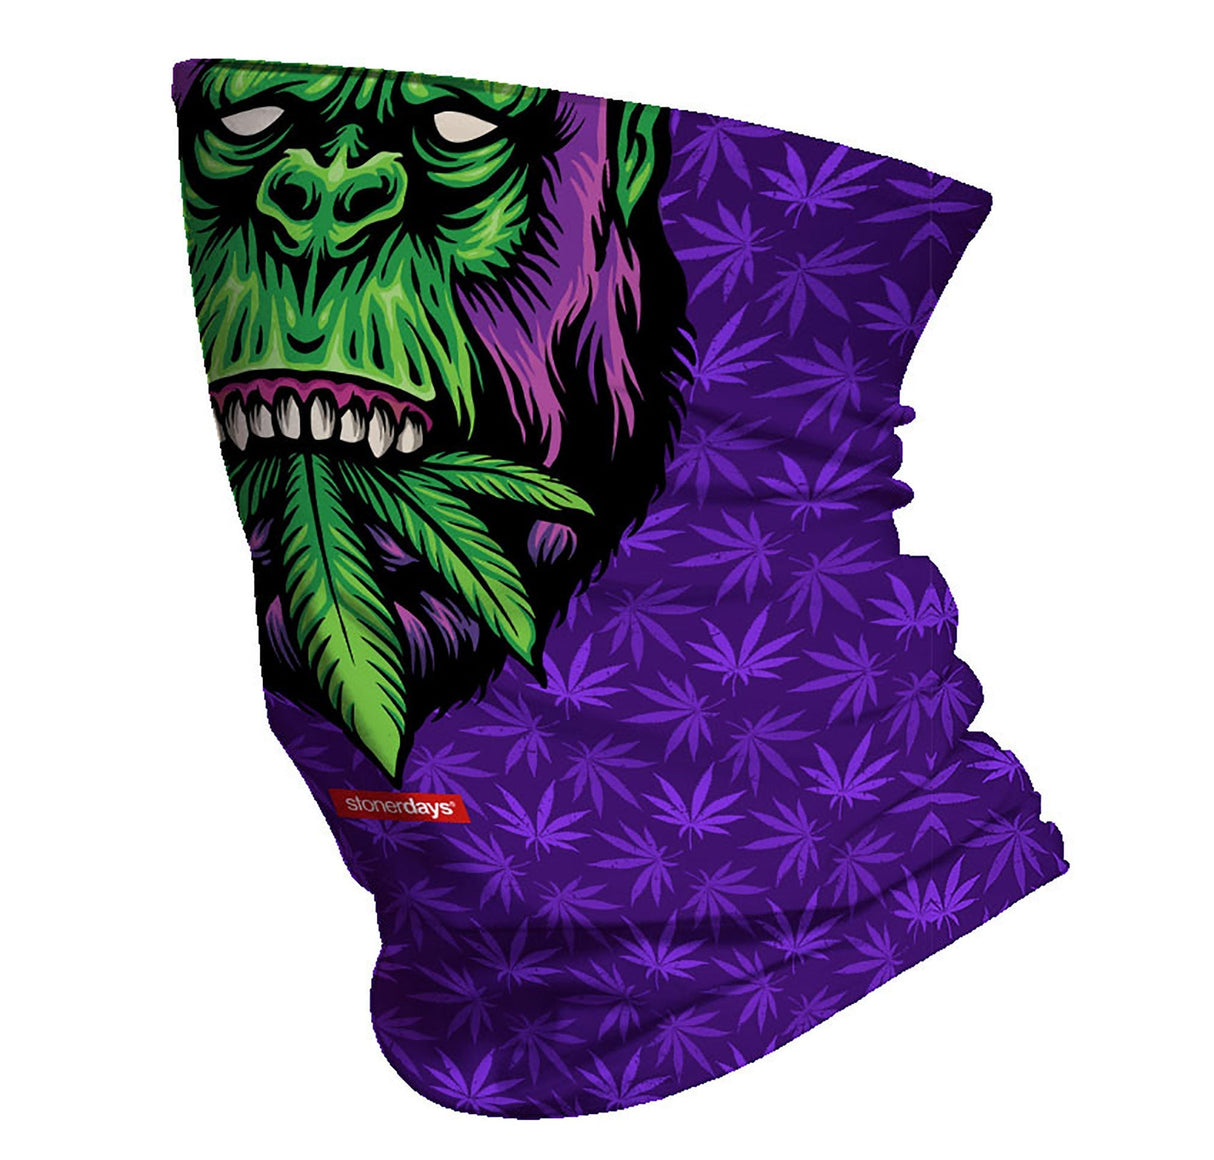 StonerDays Philly Blunts Neck Gaiter with vibrant cannabis leaf design and monster graphic